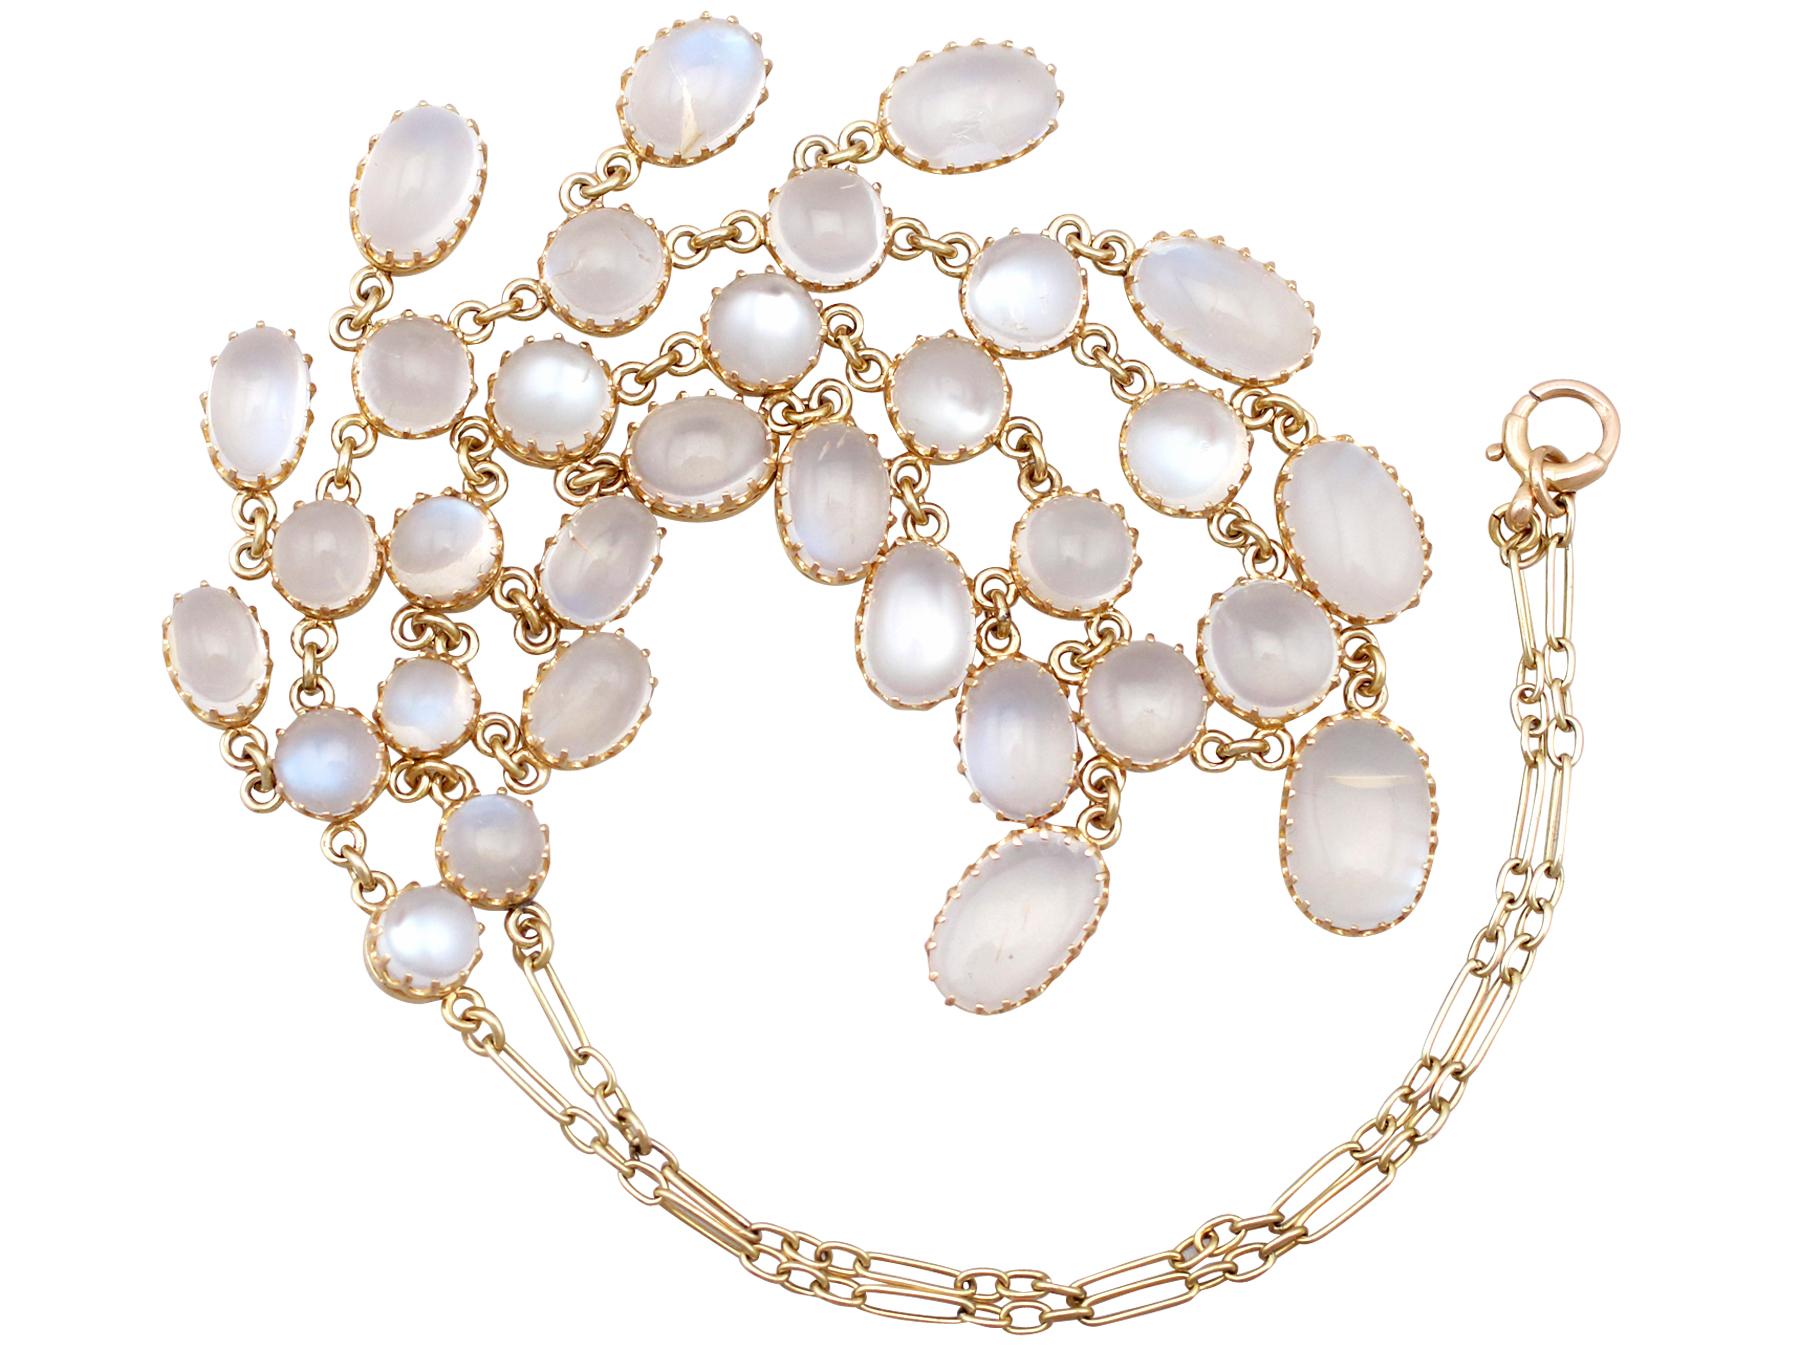 An impressive antique 1900s 42.20 carat moonstone and 9 karat yellow gold necklace; part of our diverse antique estate jewelry collections.

This fine and impressive antique moonstone necklace has been crafted in 9k yellow gold.

The necklace is